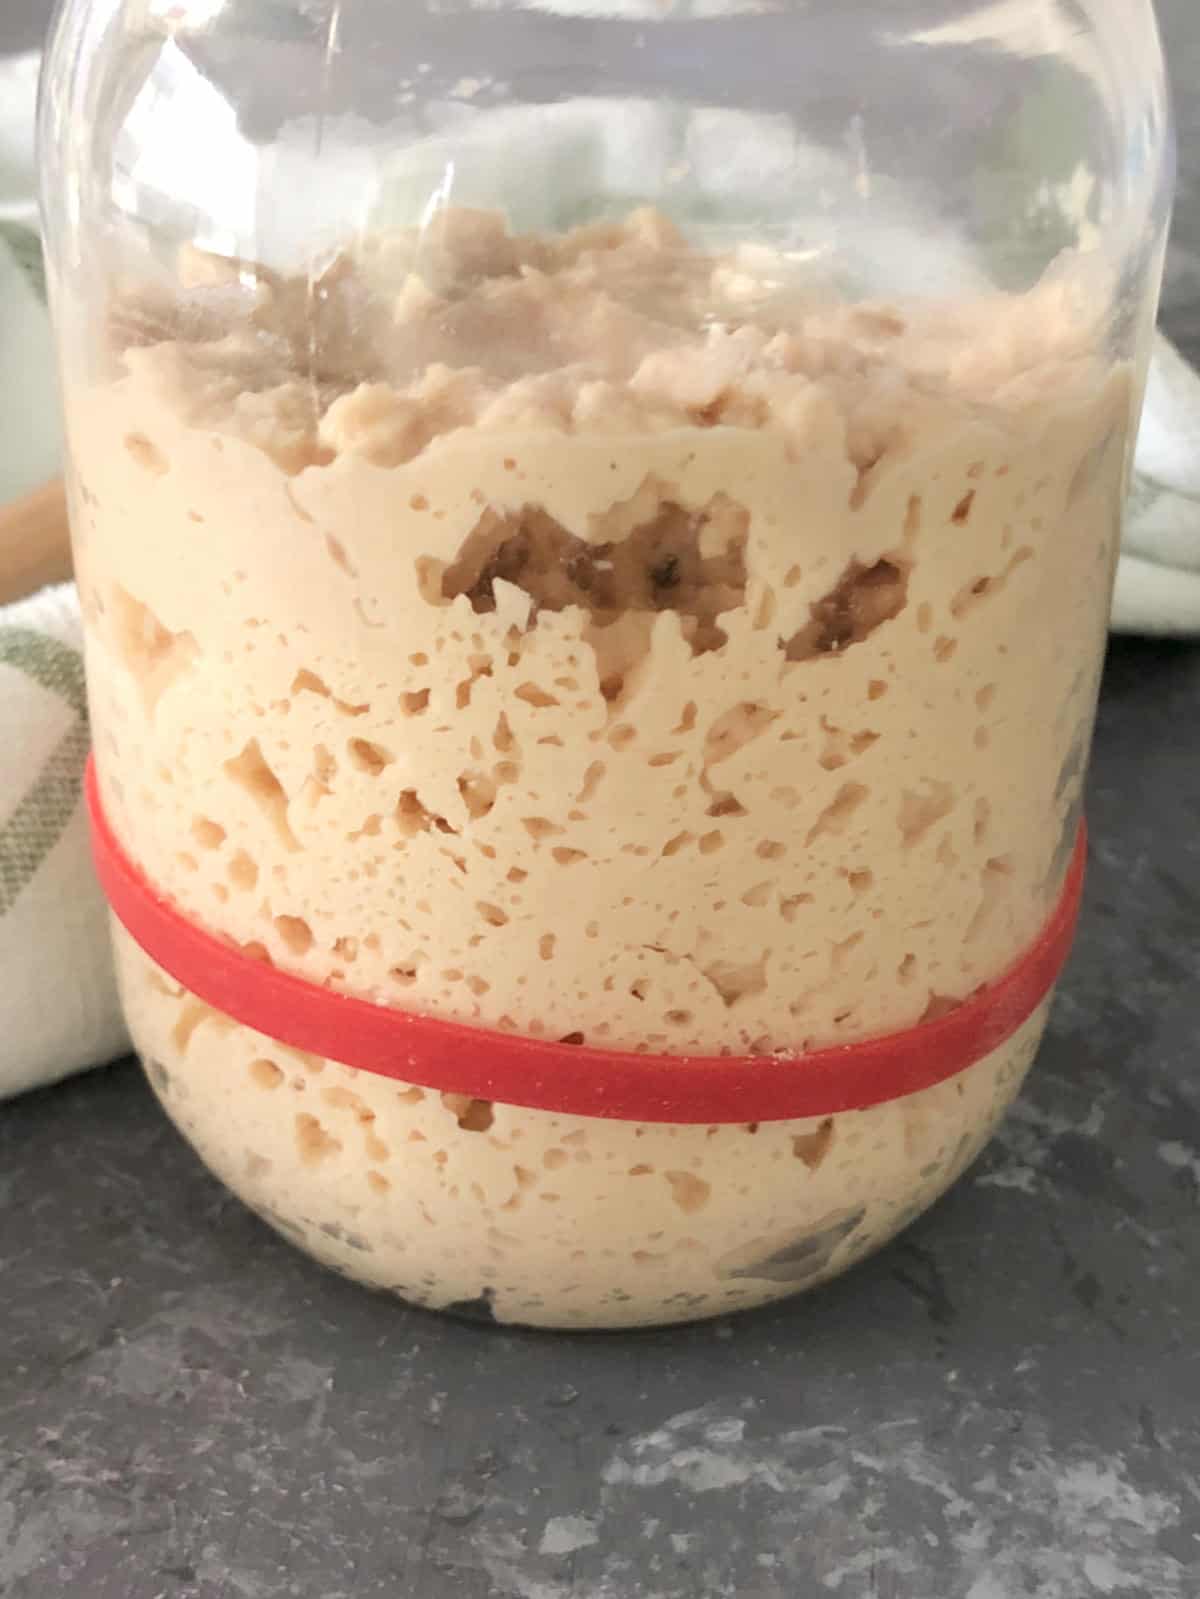 Sourdough atta starter jar with a rubber band to show the rise of the starter.